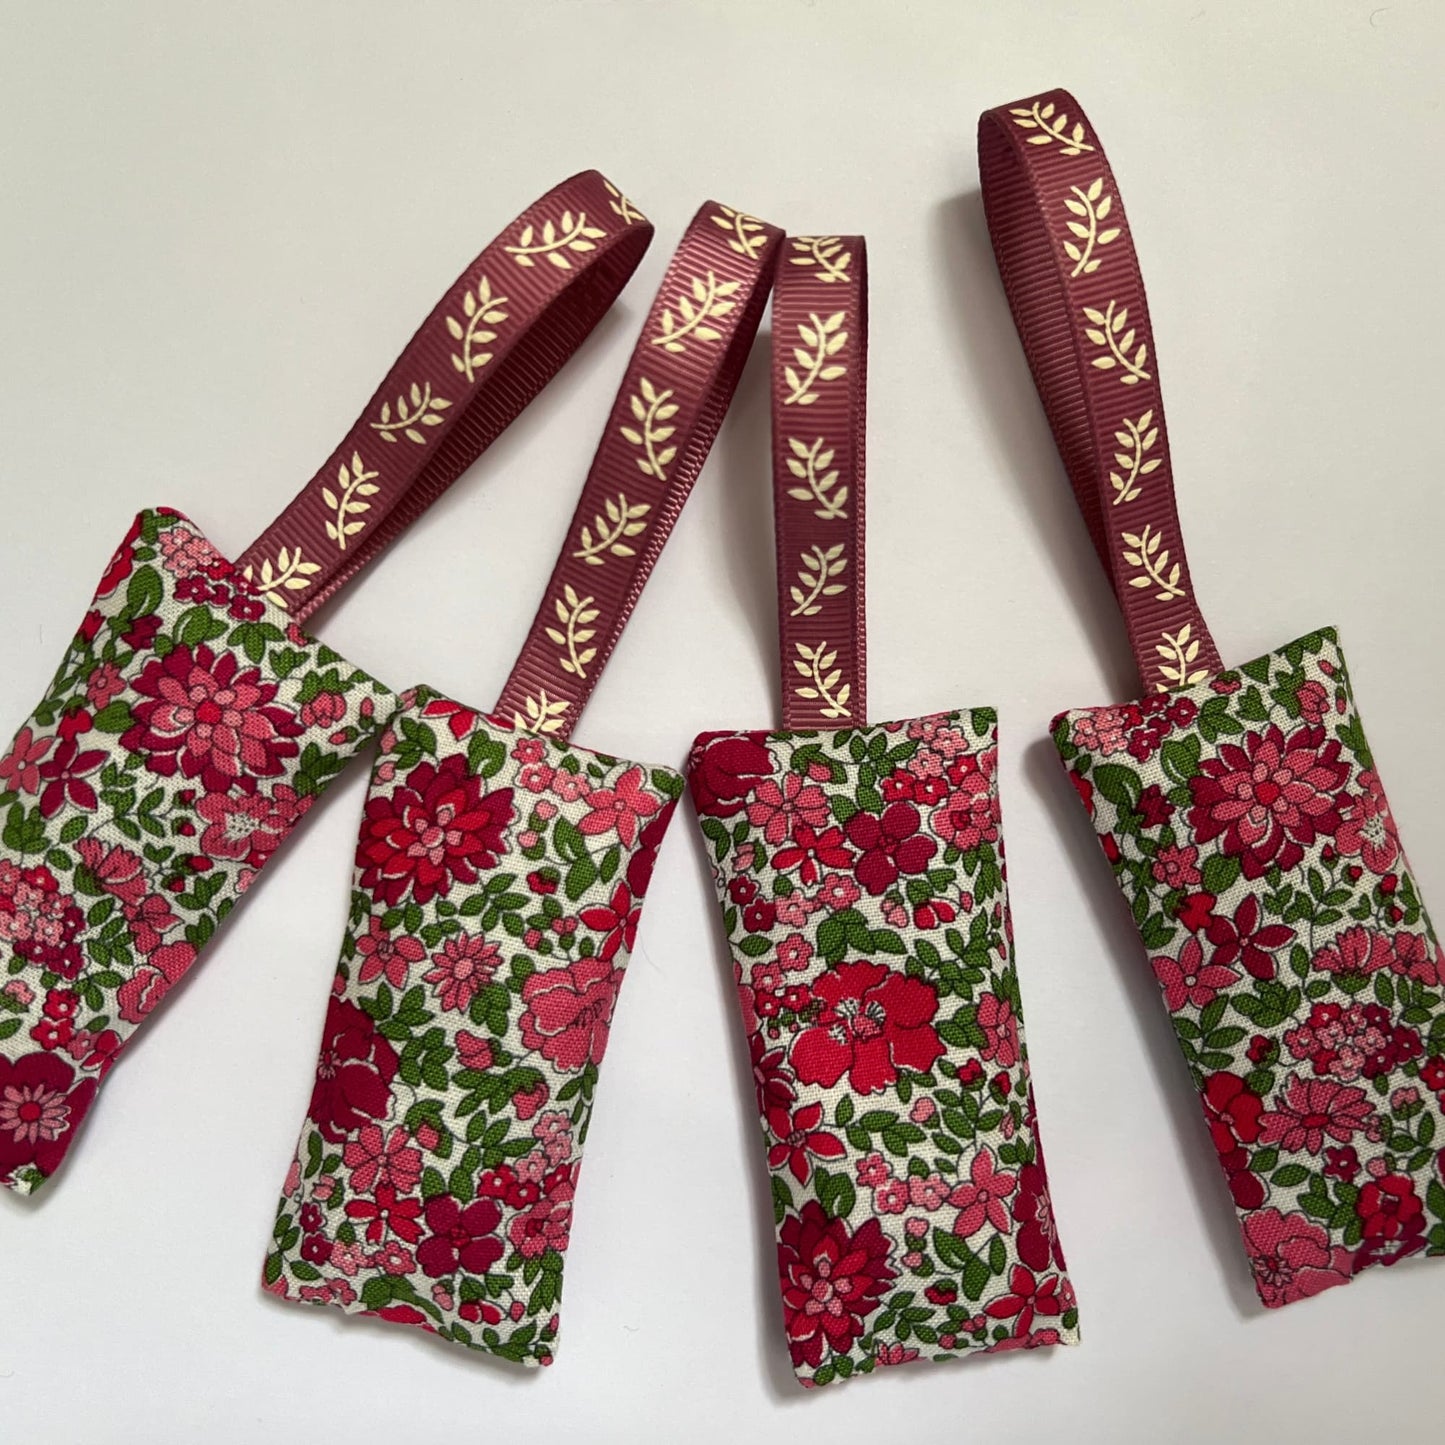 Scented Lavender Sachets - Liberty Fabric Arley Gardens